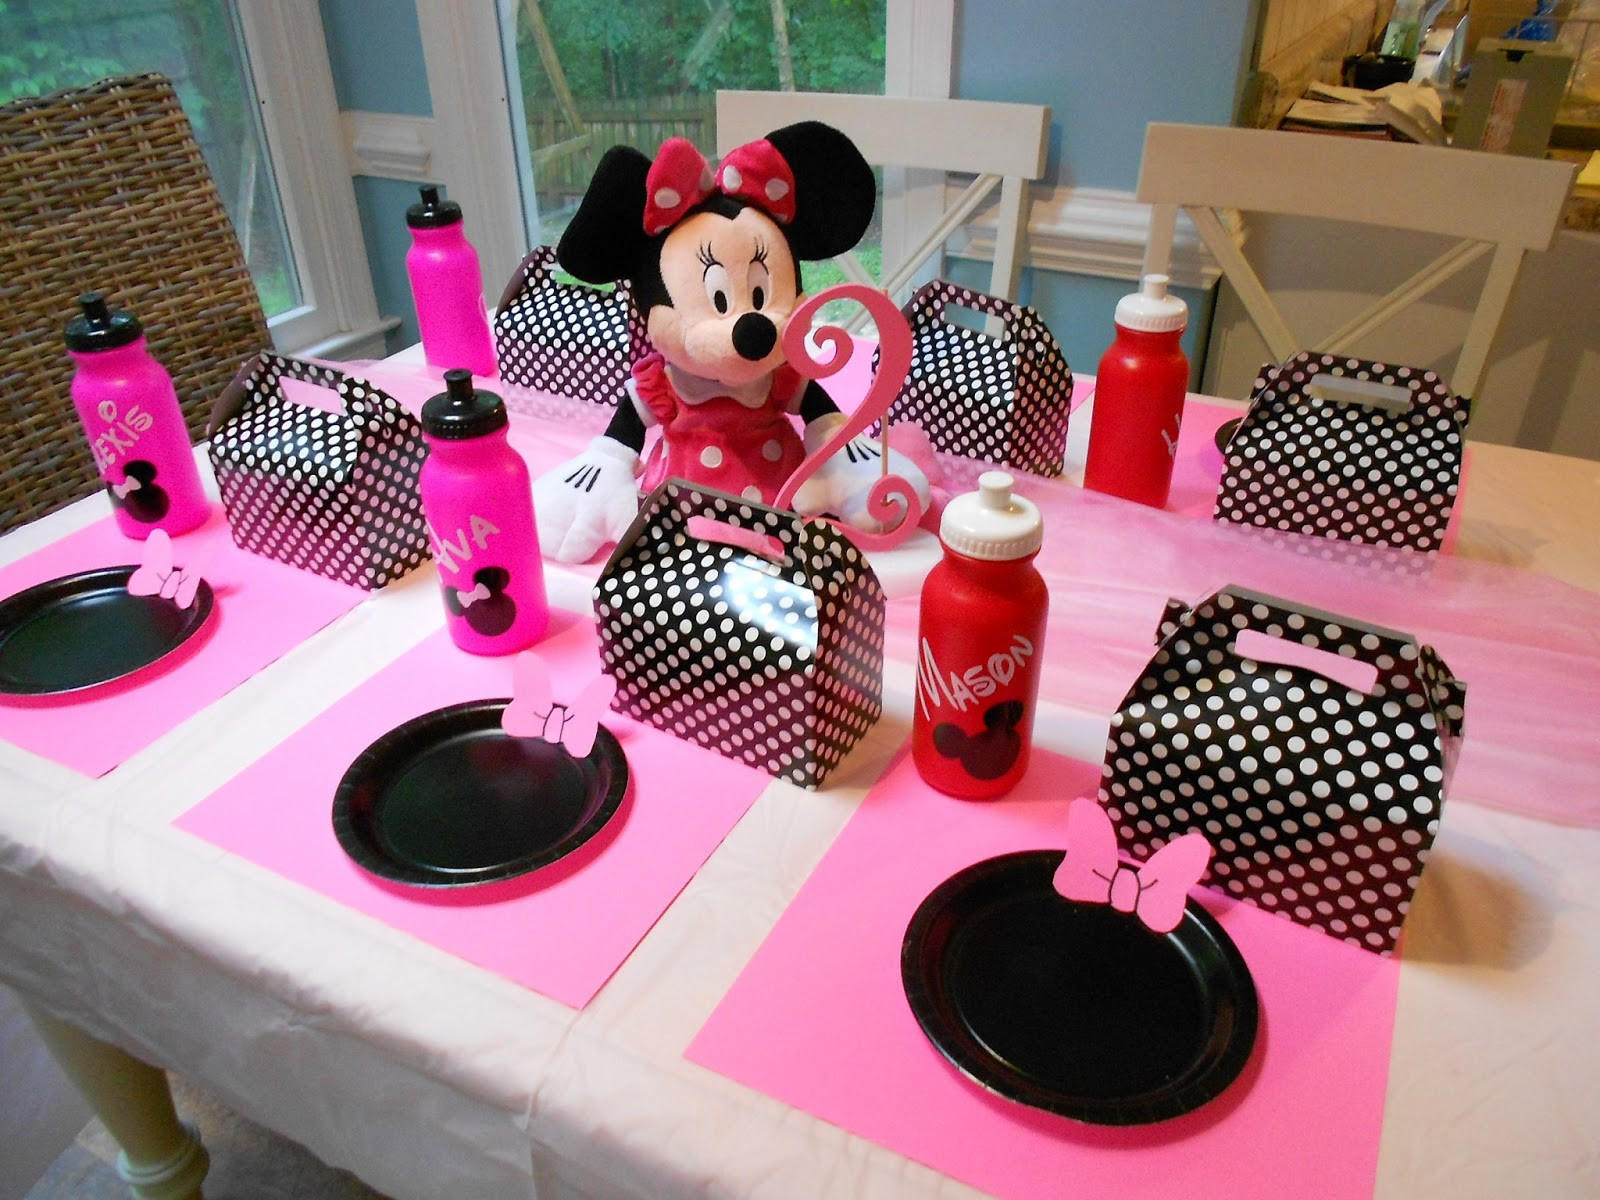 Minnie Mouse Birthday Party Decorations
 Adventures With Toddlers and Preschoolers Minnie Mouse